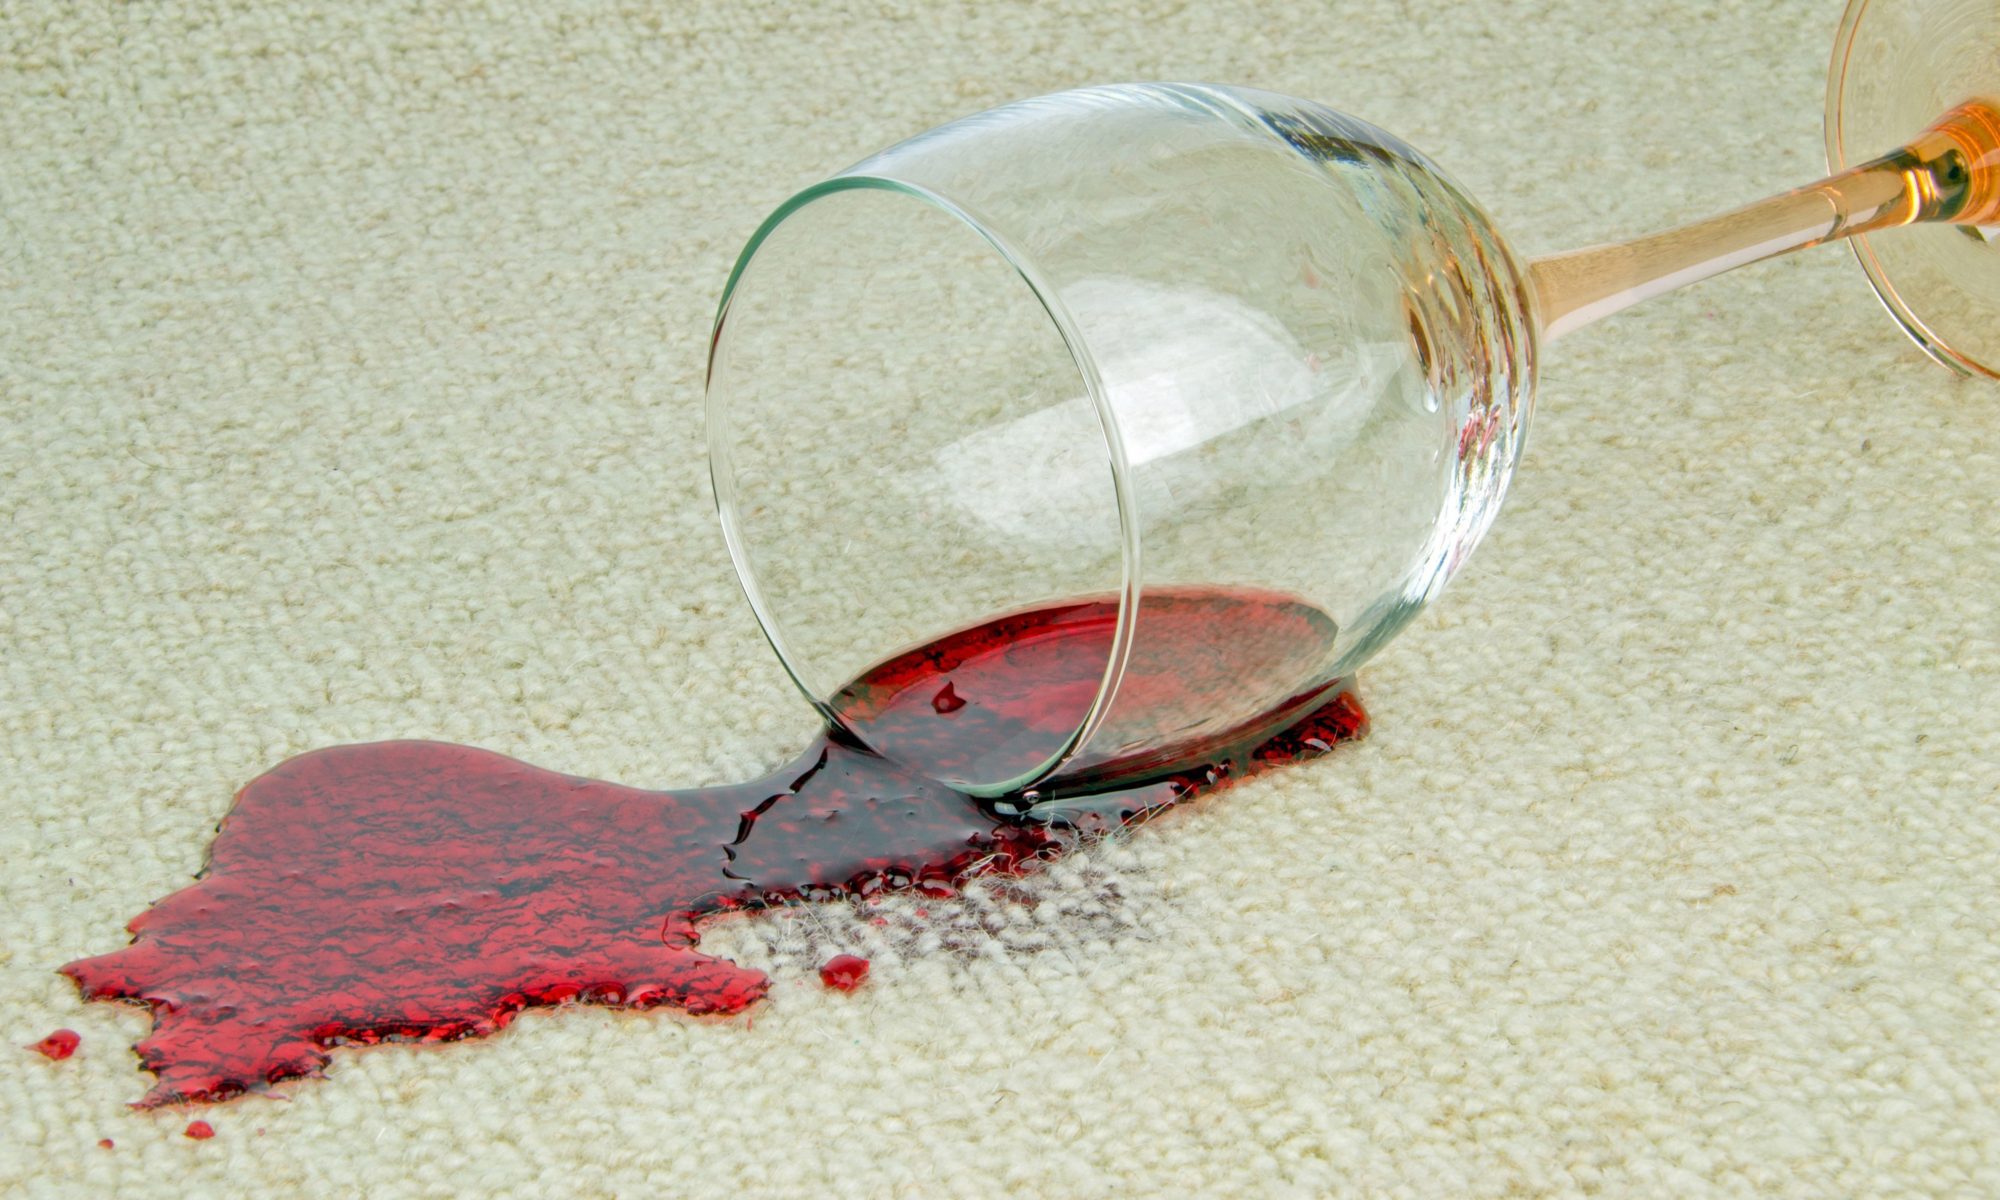 a glass of red wine spilled onto a white carpet